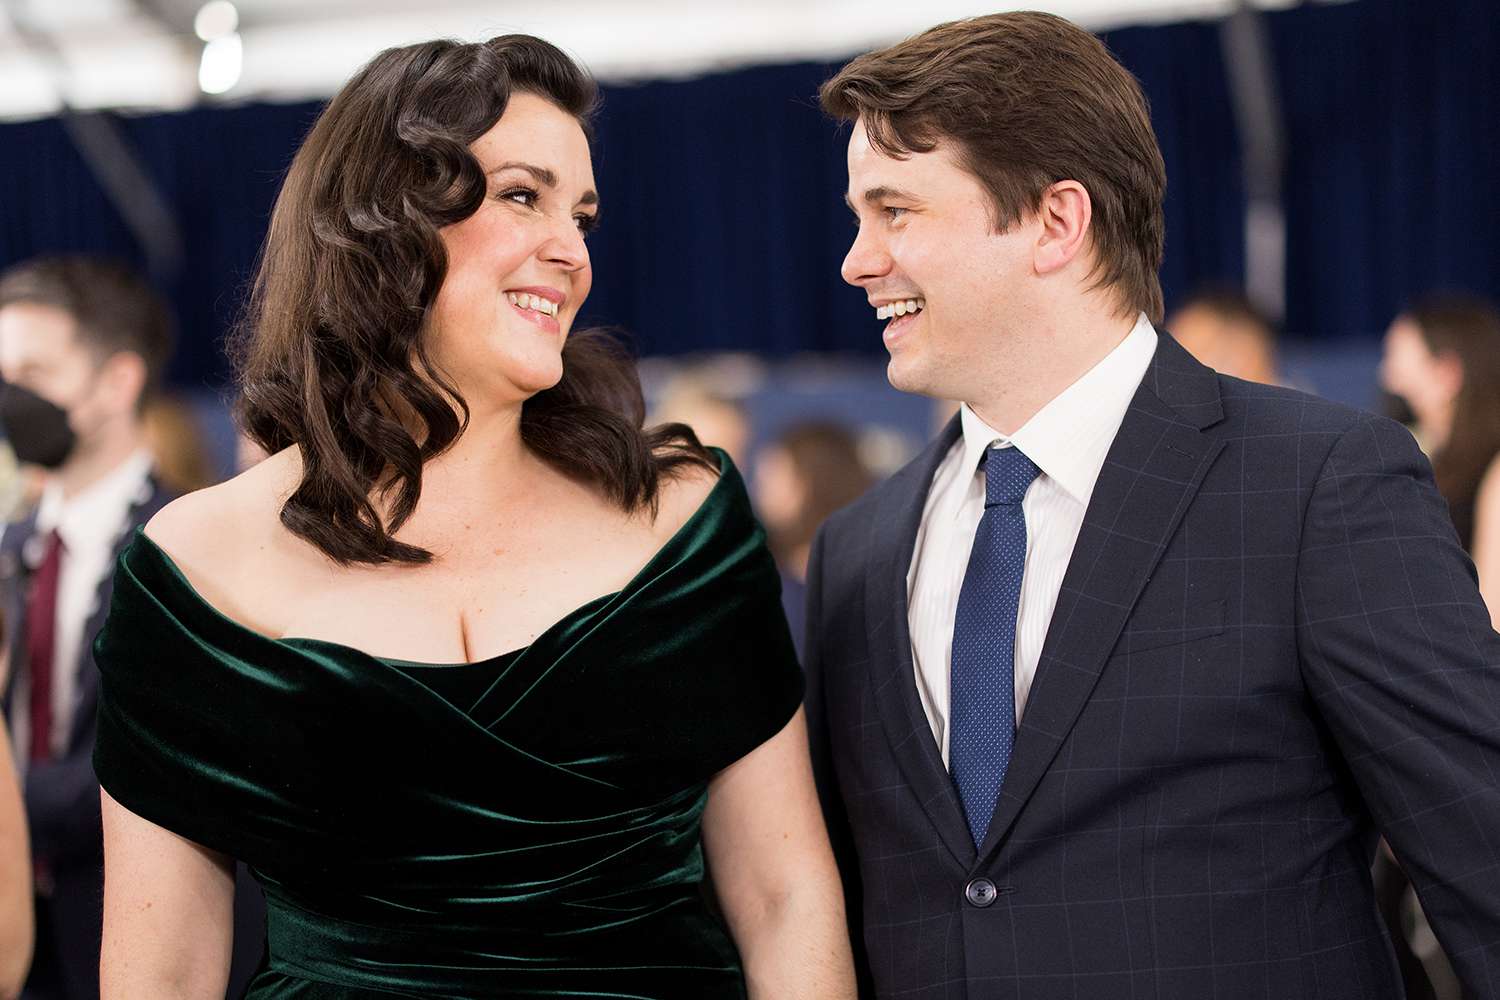 Melanie Lynskey Says Husband Jason Ritter Is 'Genuinely Sacrificing' Roles for Her Career Success (Exclusive)